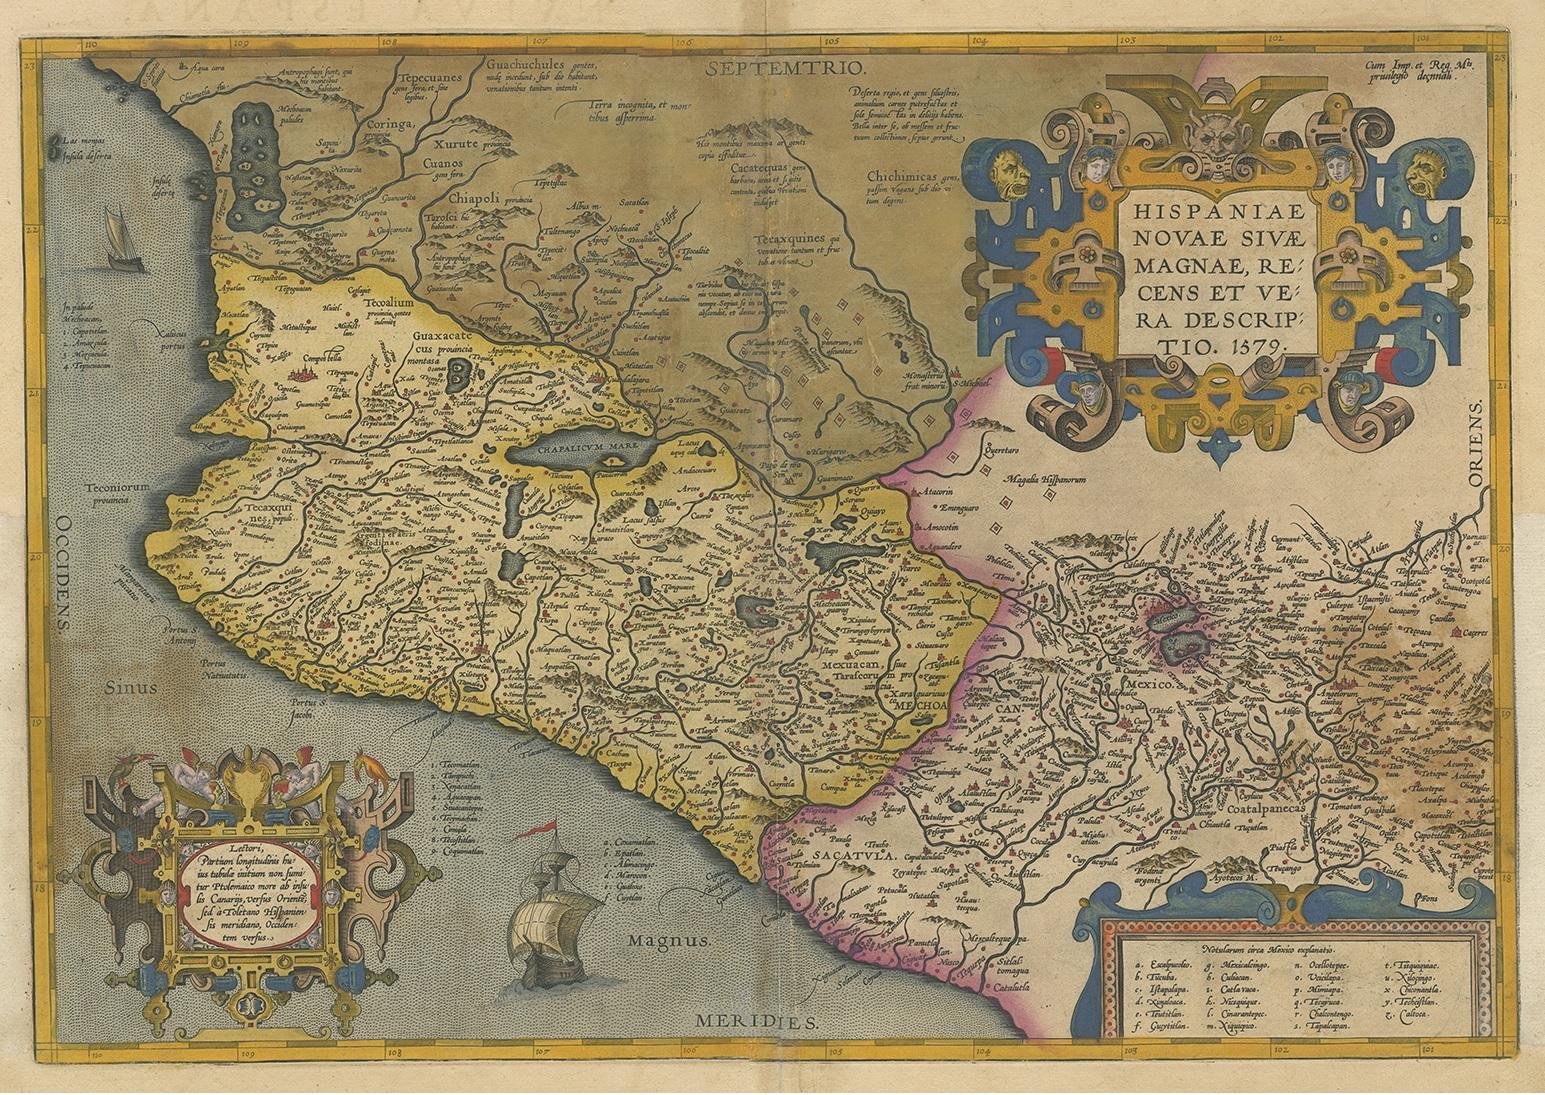 Antique map titled 'Hispaniae Novae Sivae Magnae Recens Et Vera Descriptio 1579'. Map of western New Spain, showing the recently-created Spanish settlements, many rivers, and large lakes, including Lake Chapala and a mythical sea with islands in the